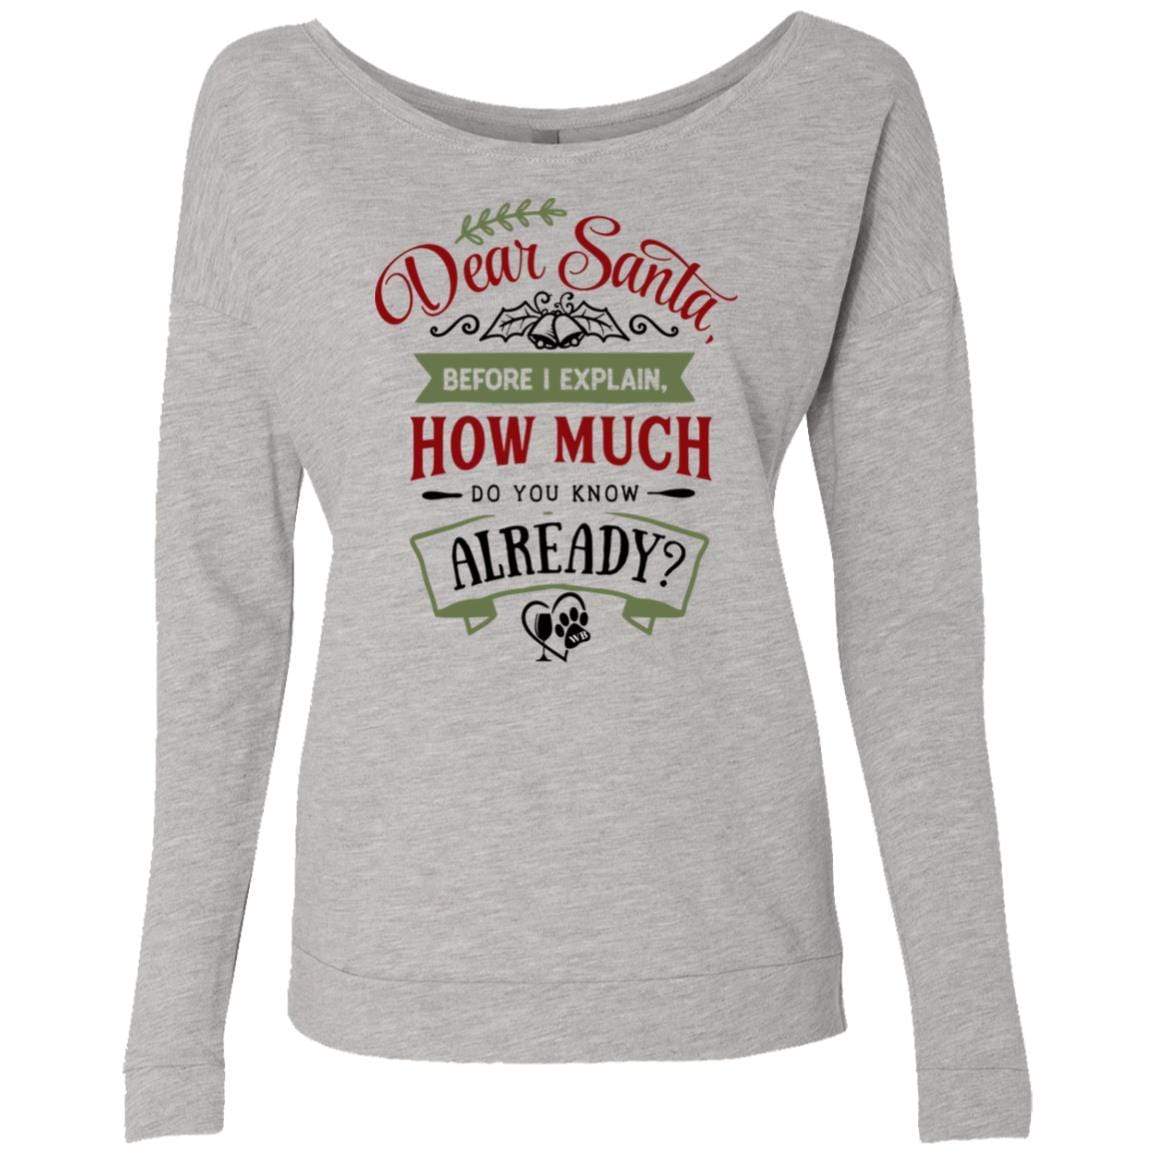 Sweatshirts Heather Grey / S WineyBitches.Co Ladies' " Dear Santa Before I Explain How Much Do You Know Already"  French Terry Scoop WineyBitchesCo